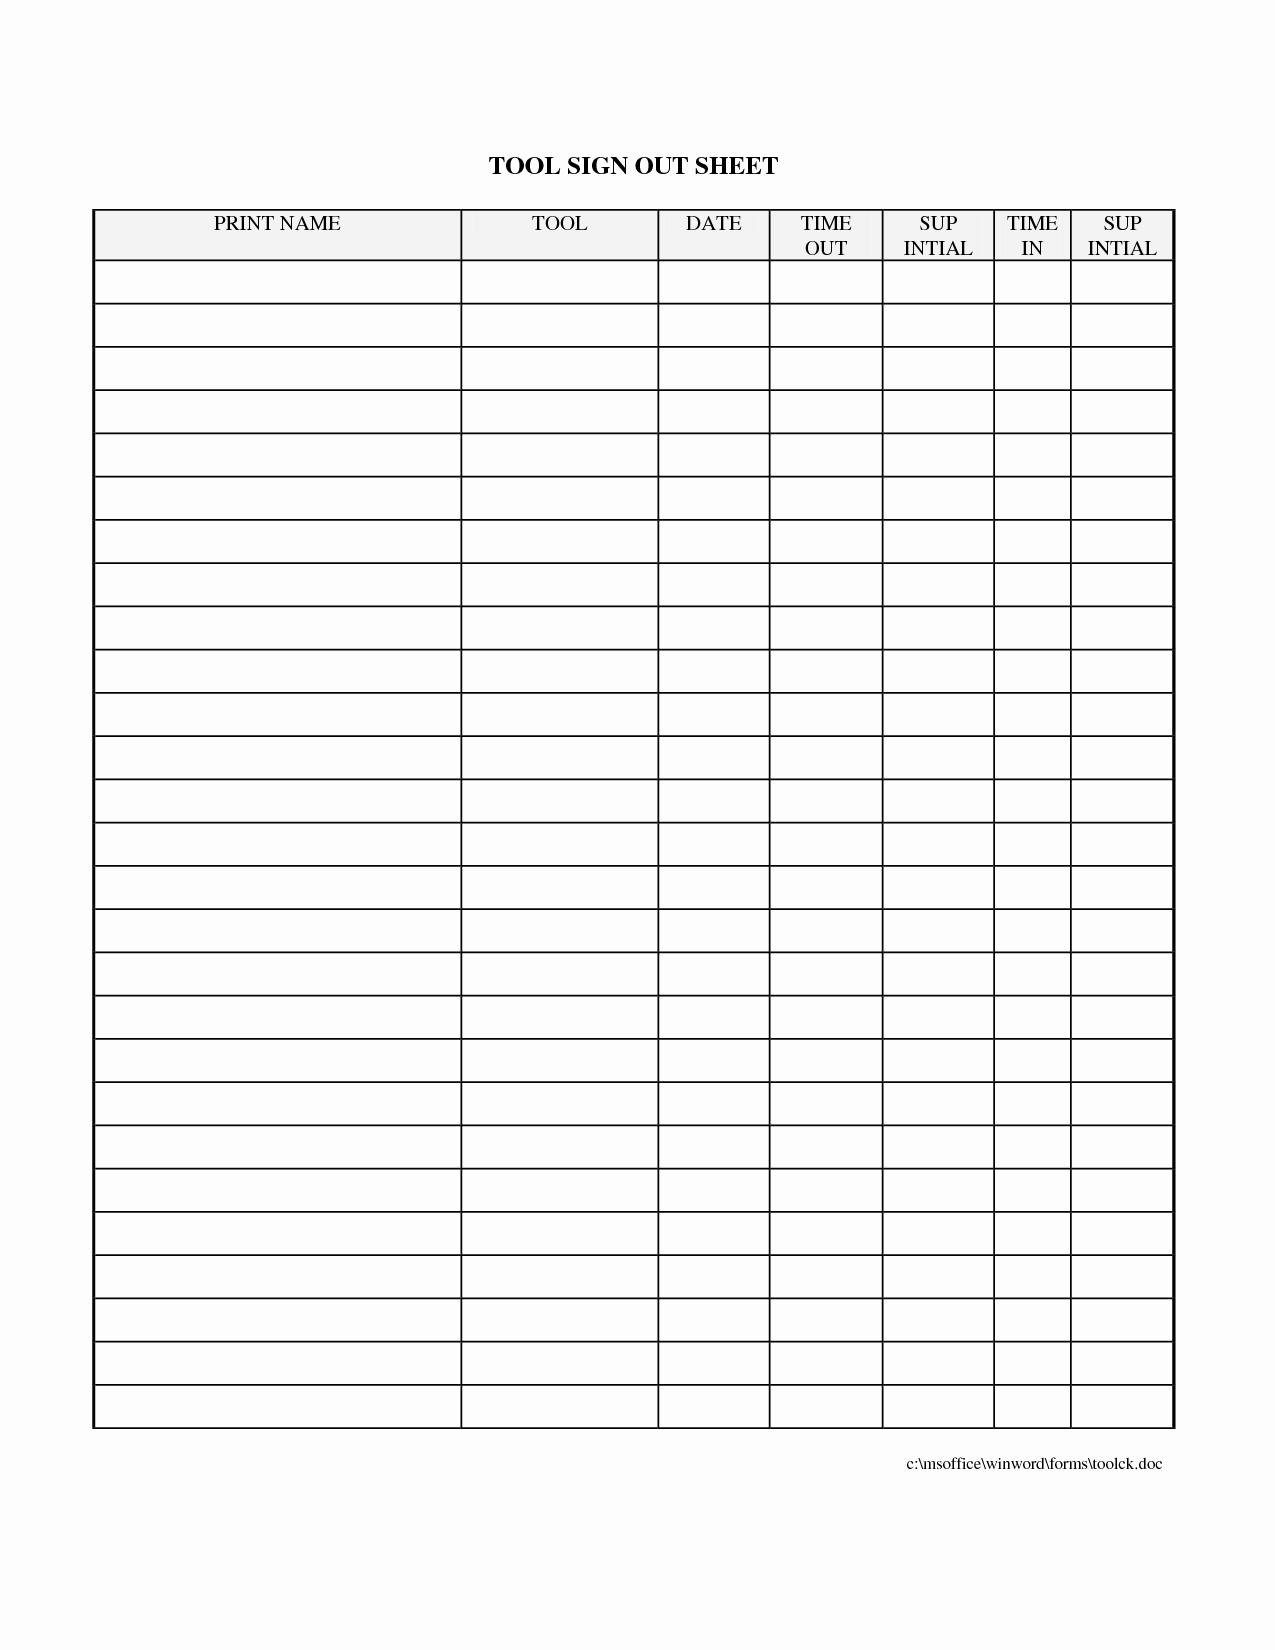 Check In Check Out Spreadsheet Beautiful Printable Sign Out Sheet Template